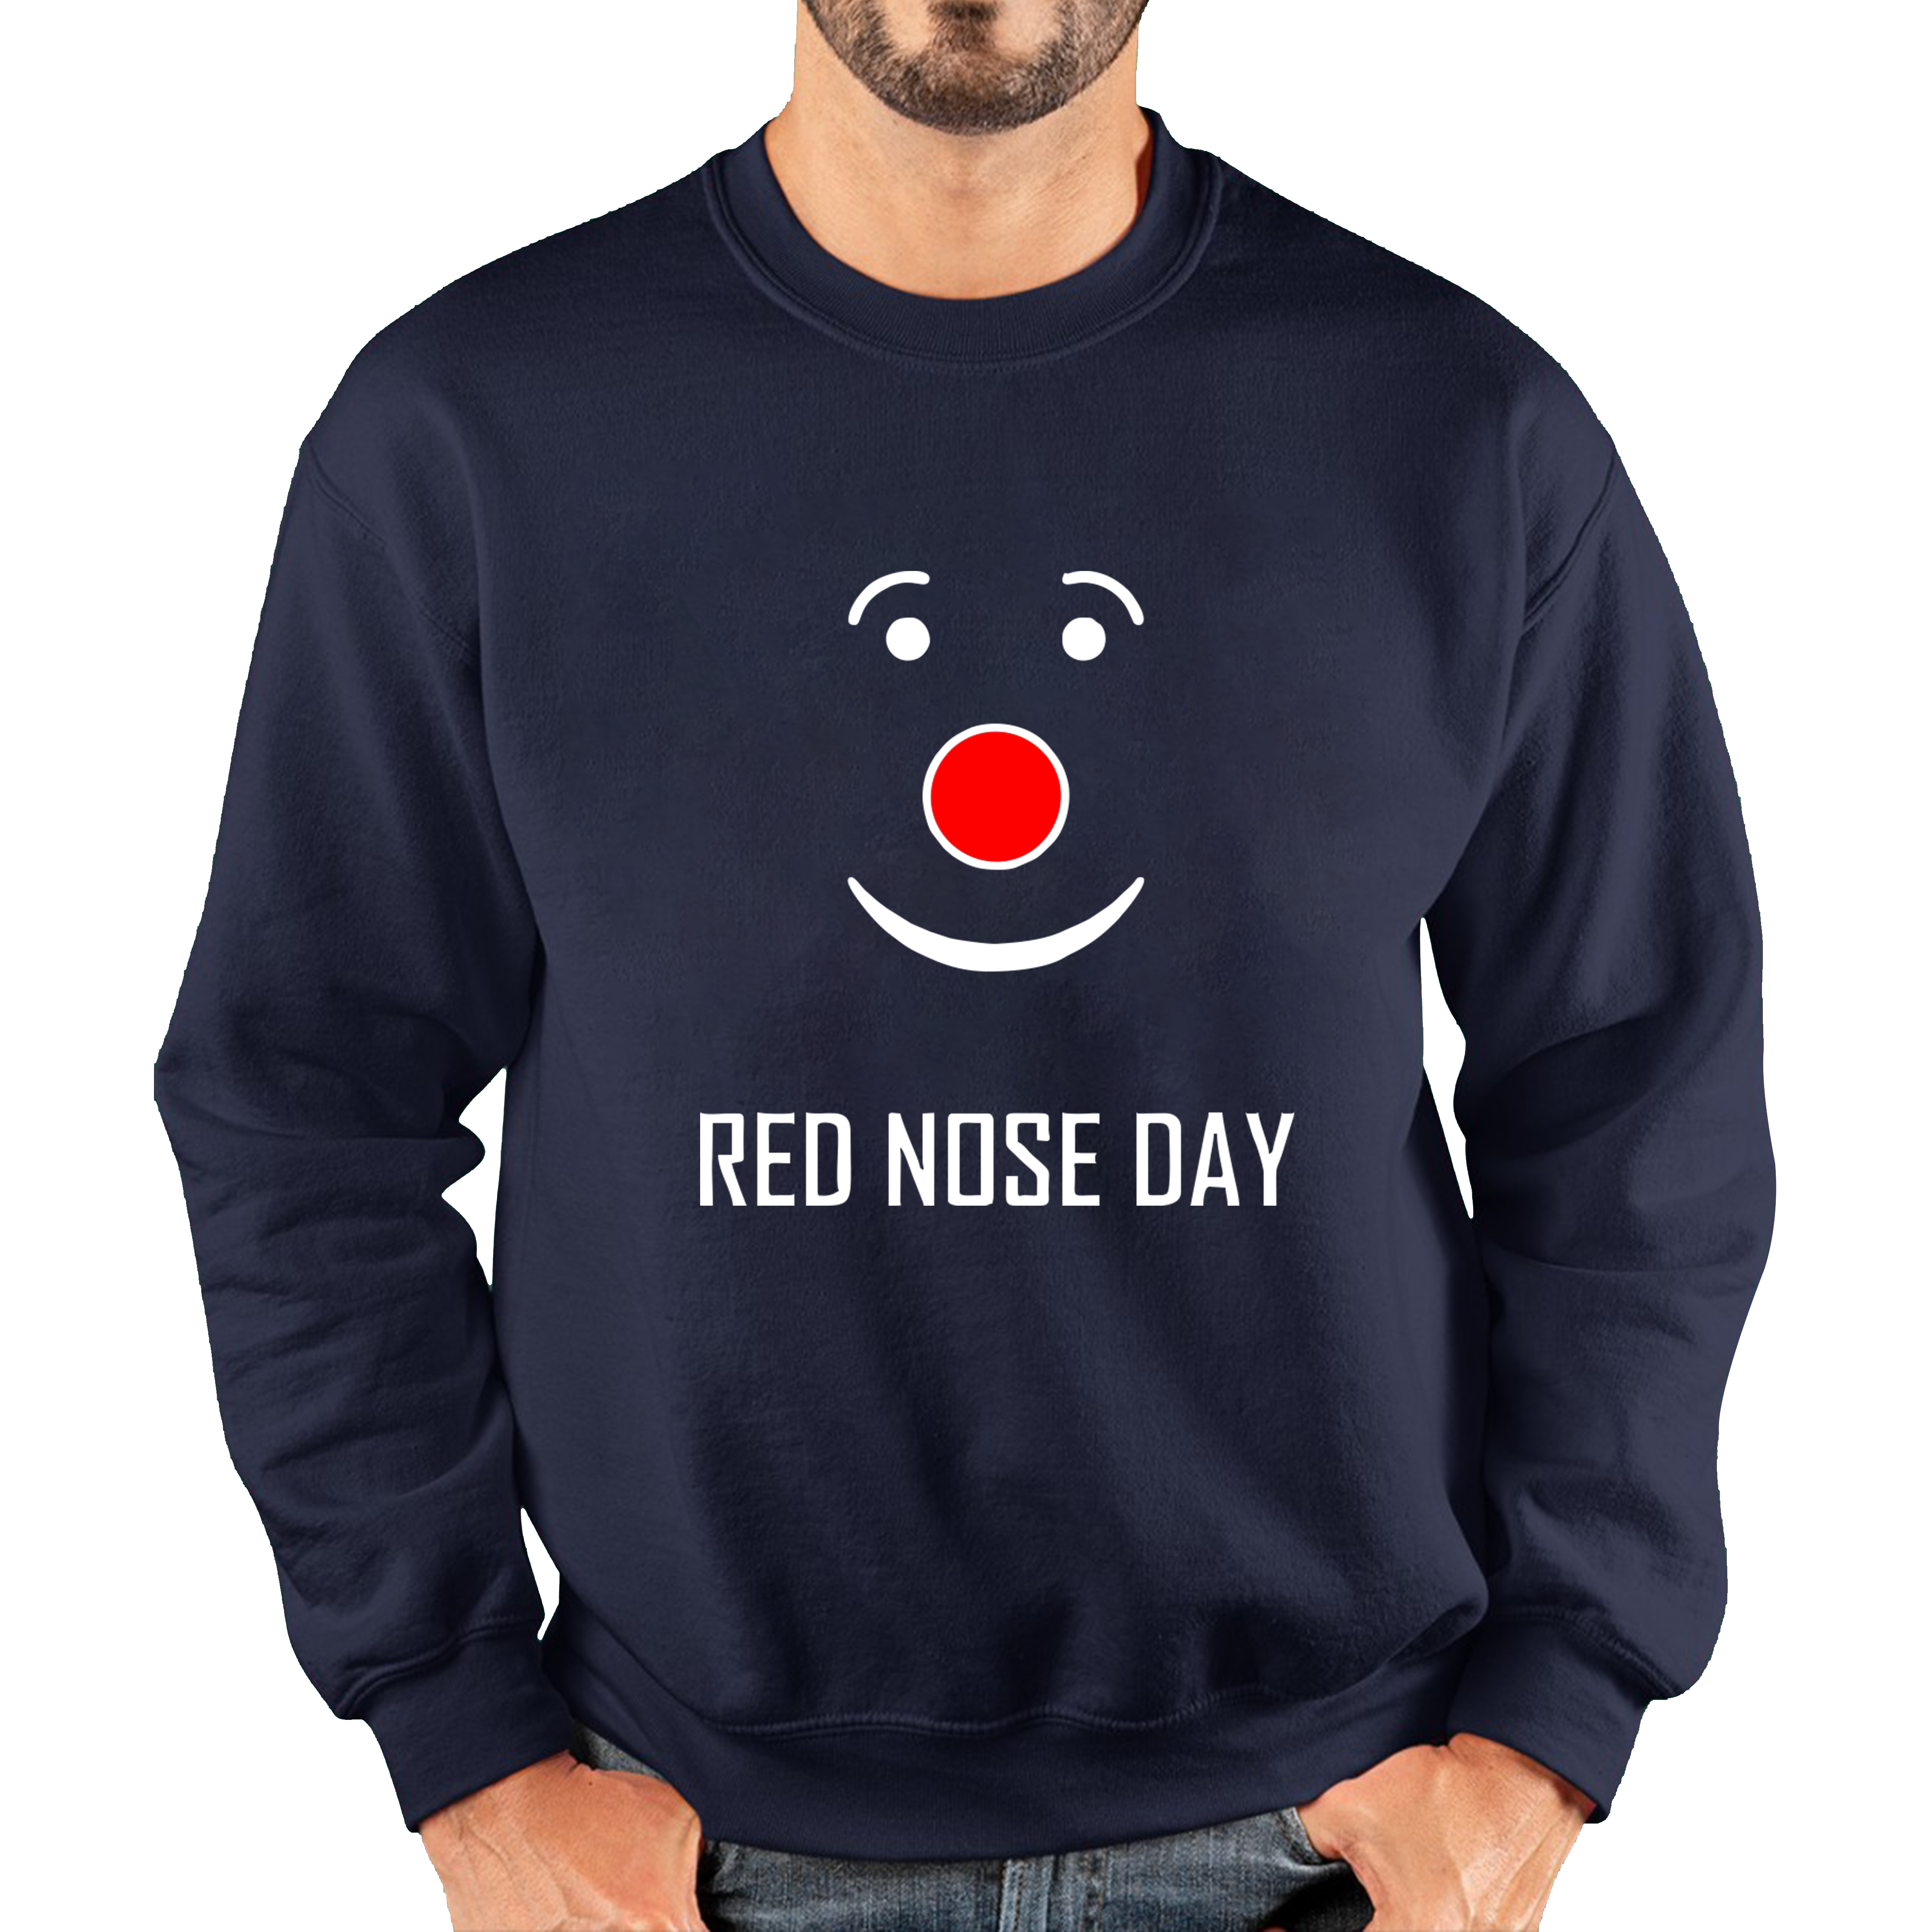 Red Nose Clown Nose Day Adult Sweatshirt. 50% Goes To Charity